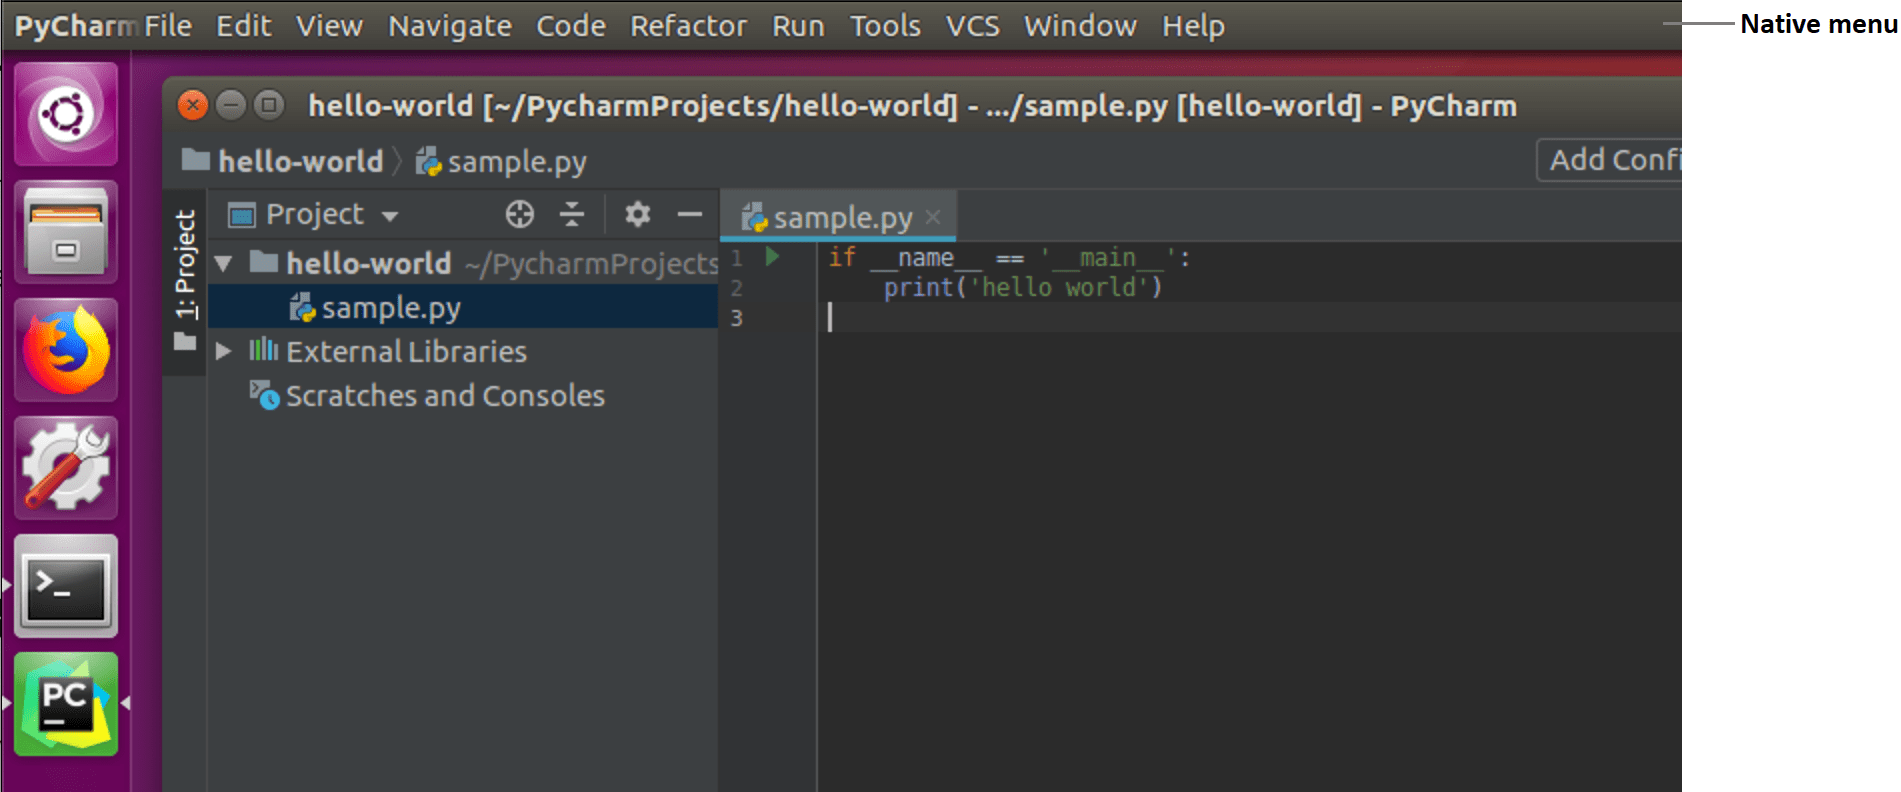 Linux native menu enabled for the IDE